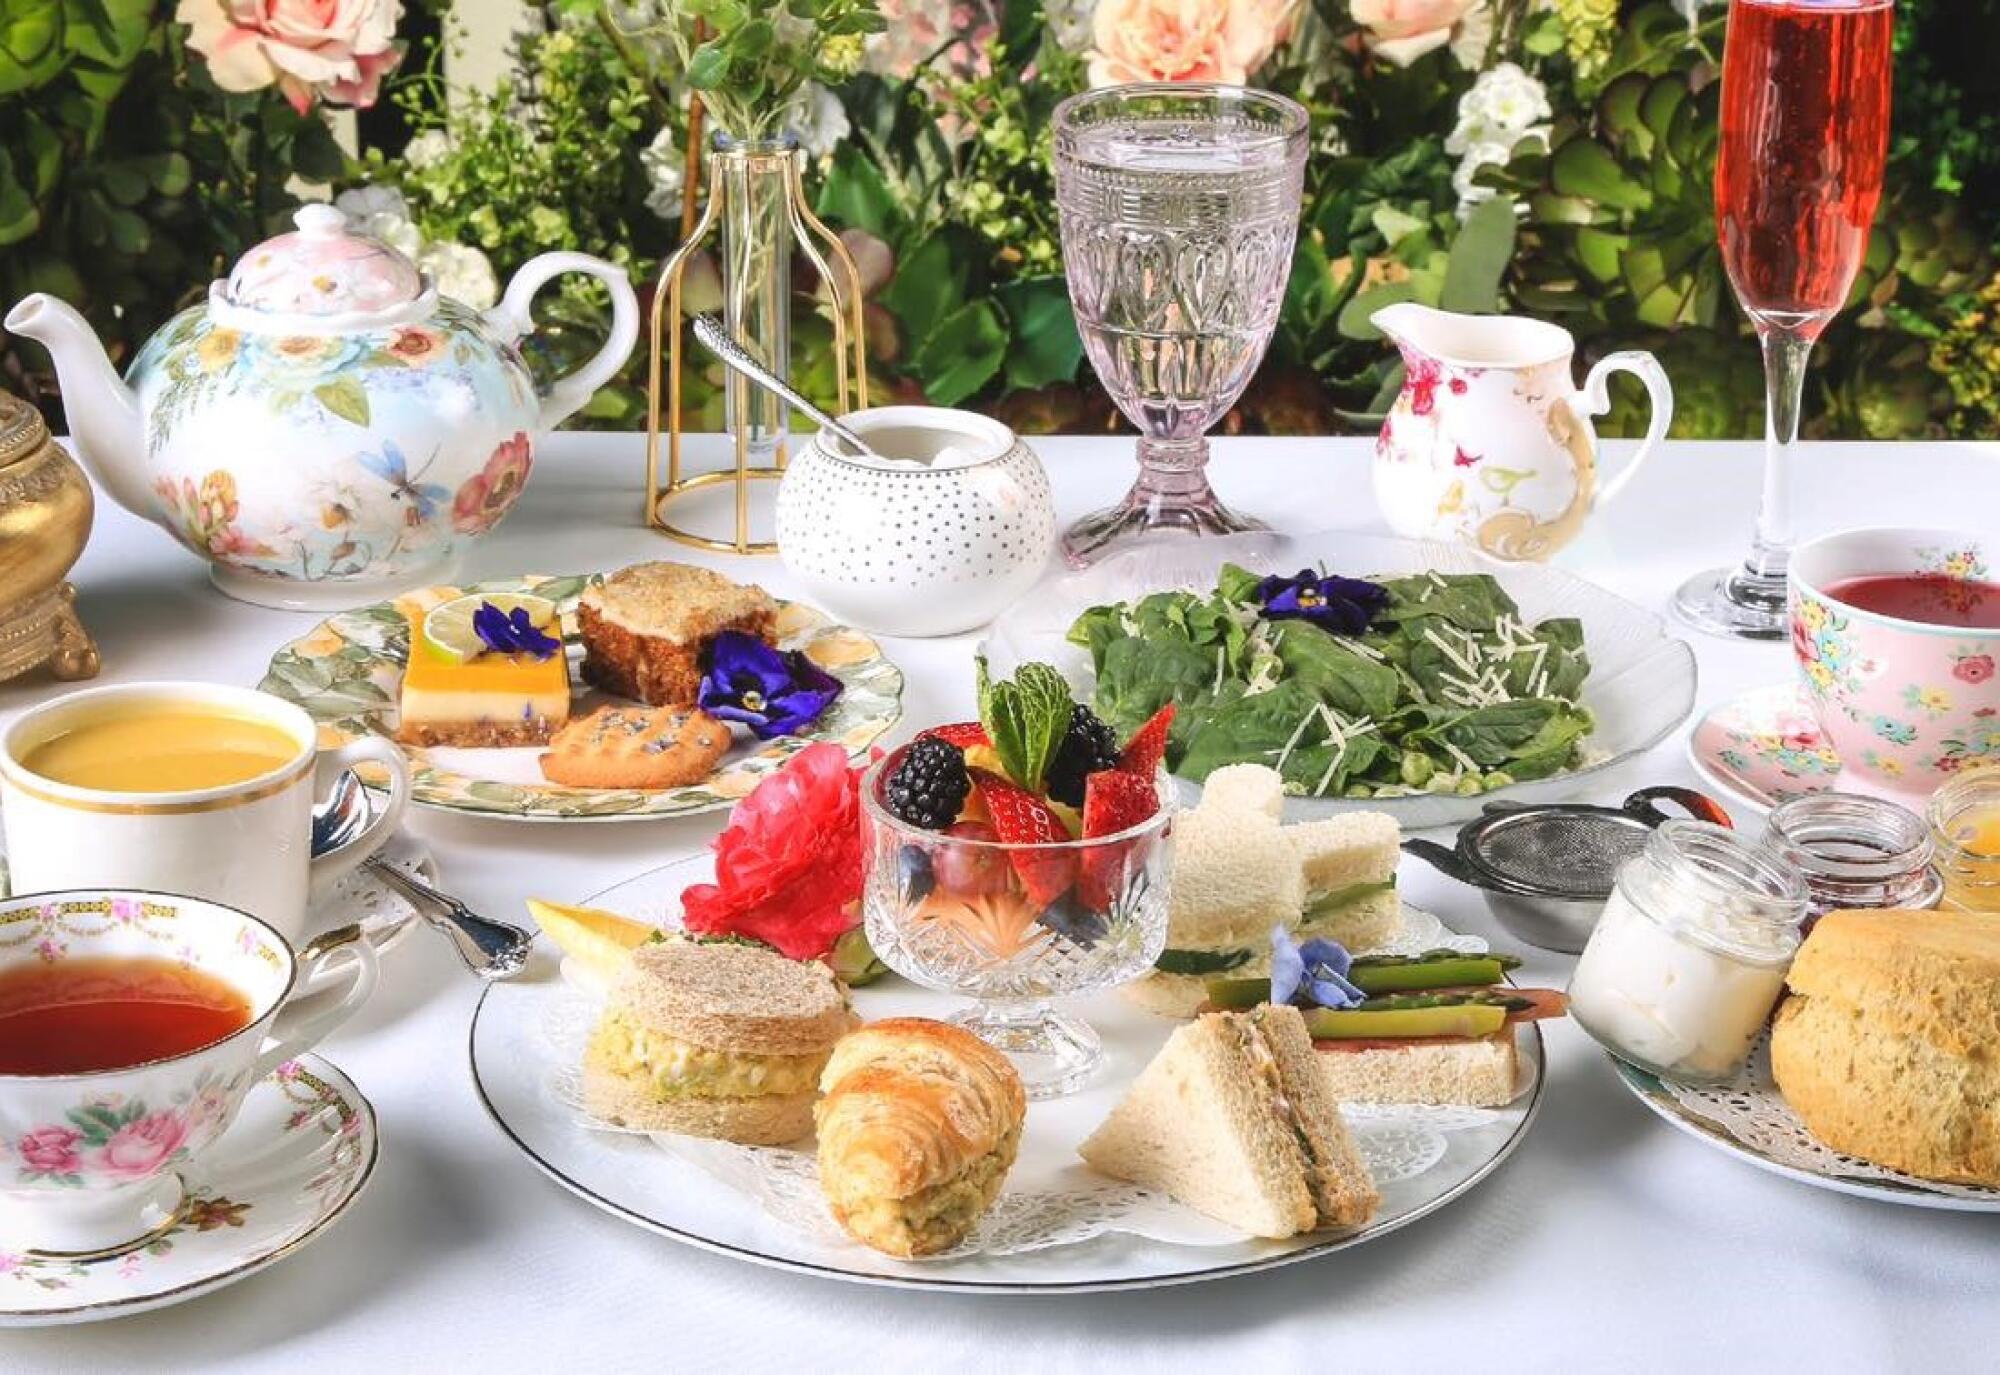 A spread with tea sandwiches, pastries, salad, teacups, a teapot, a glass of water and champagne.